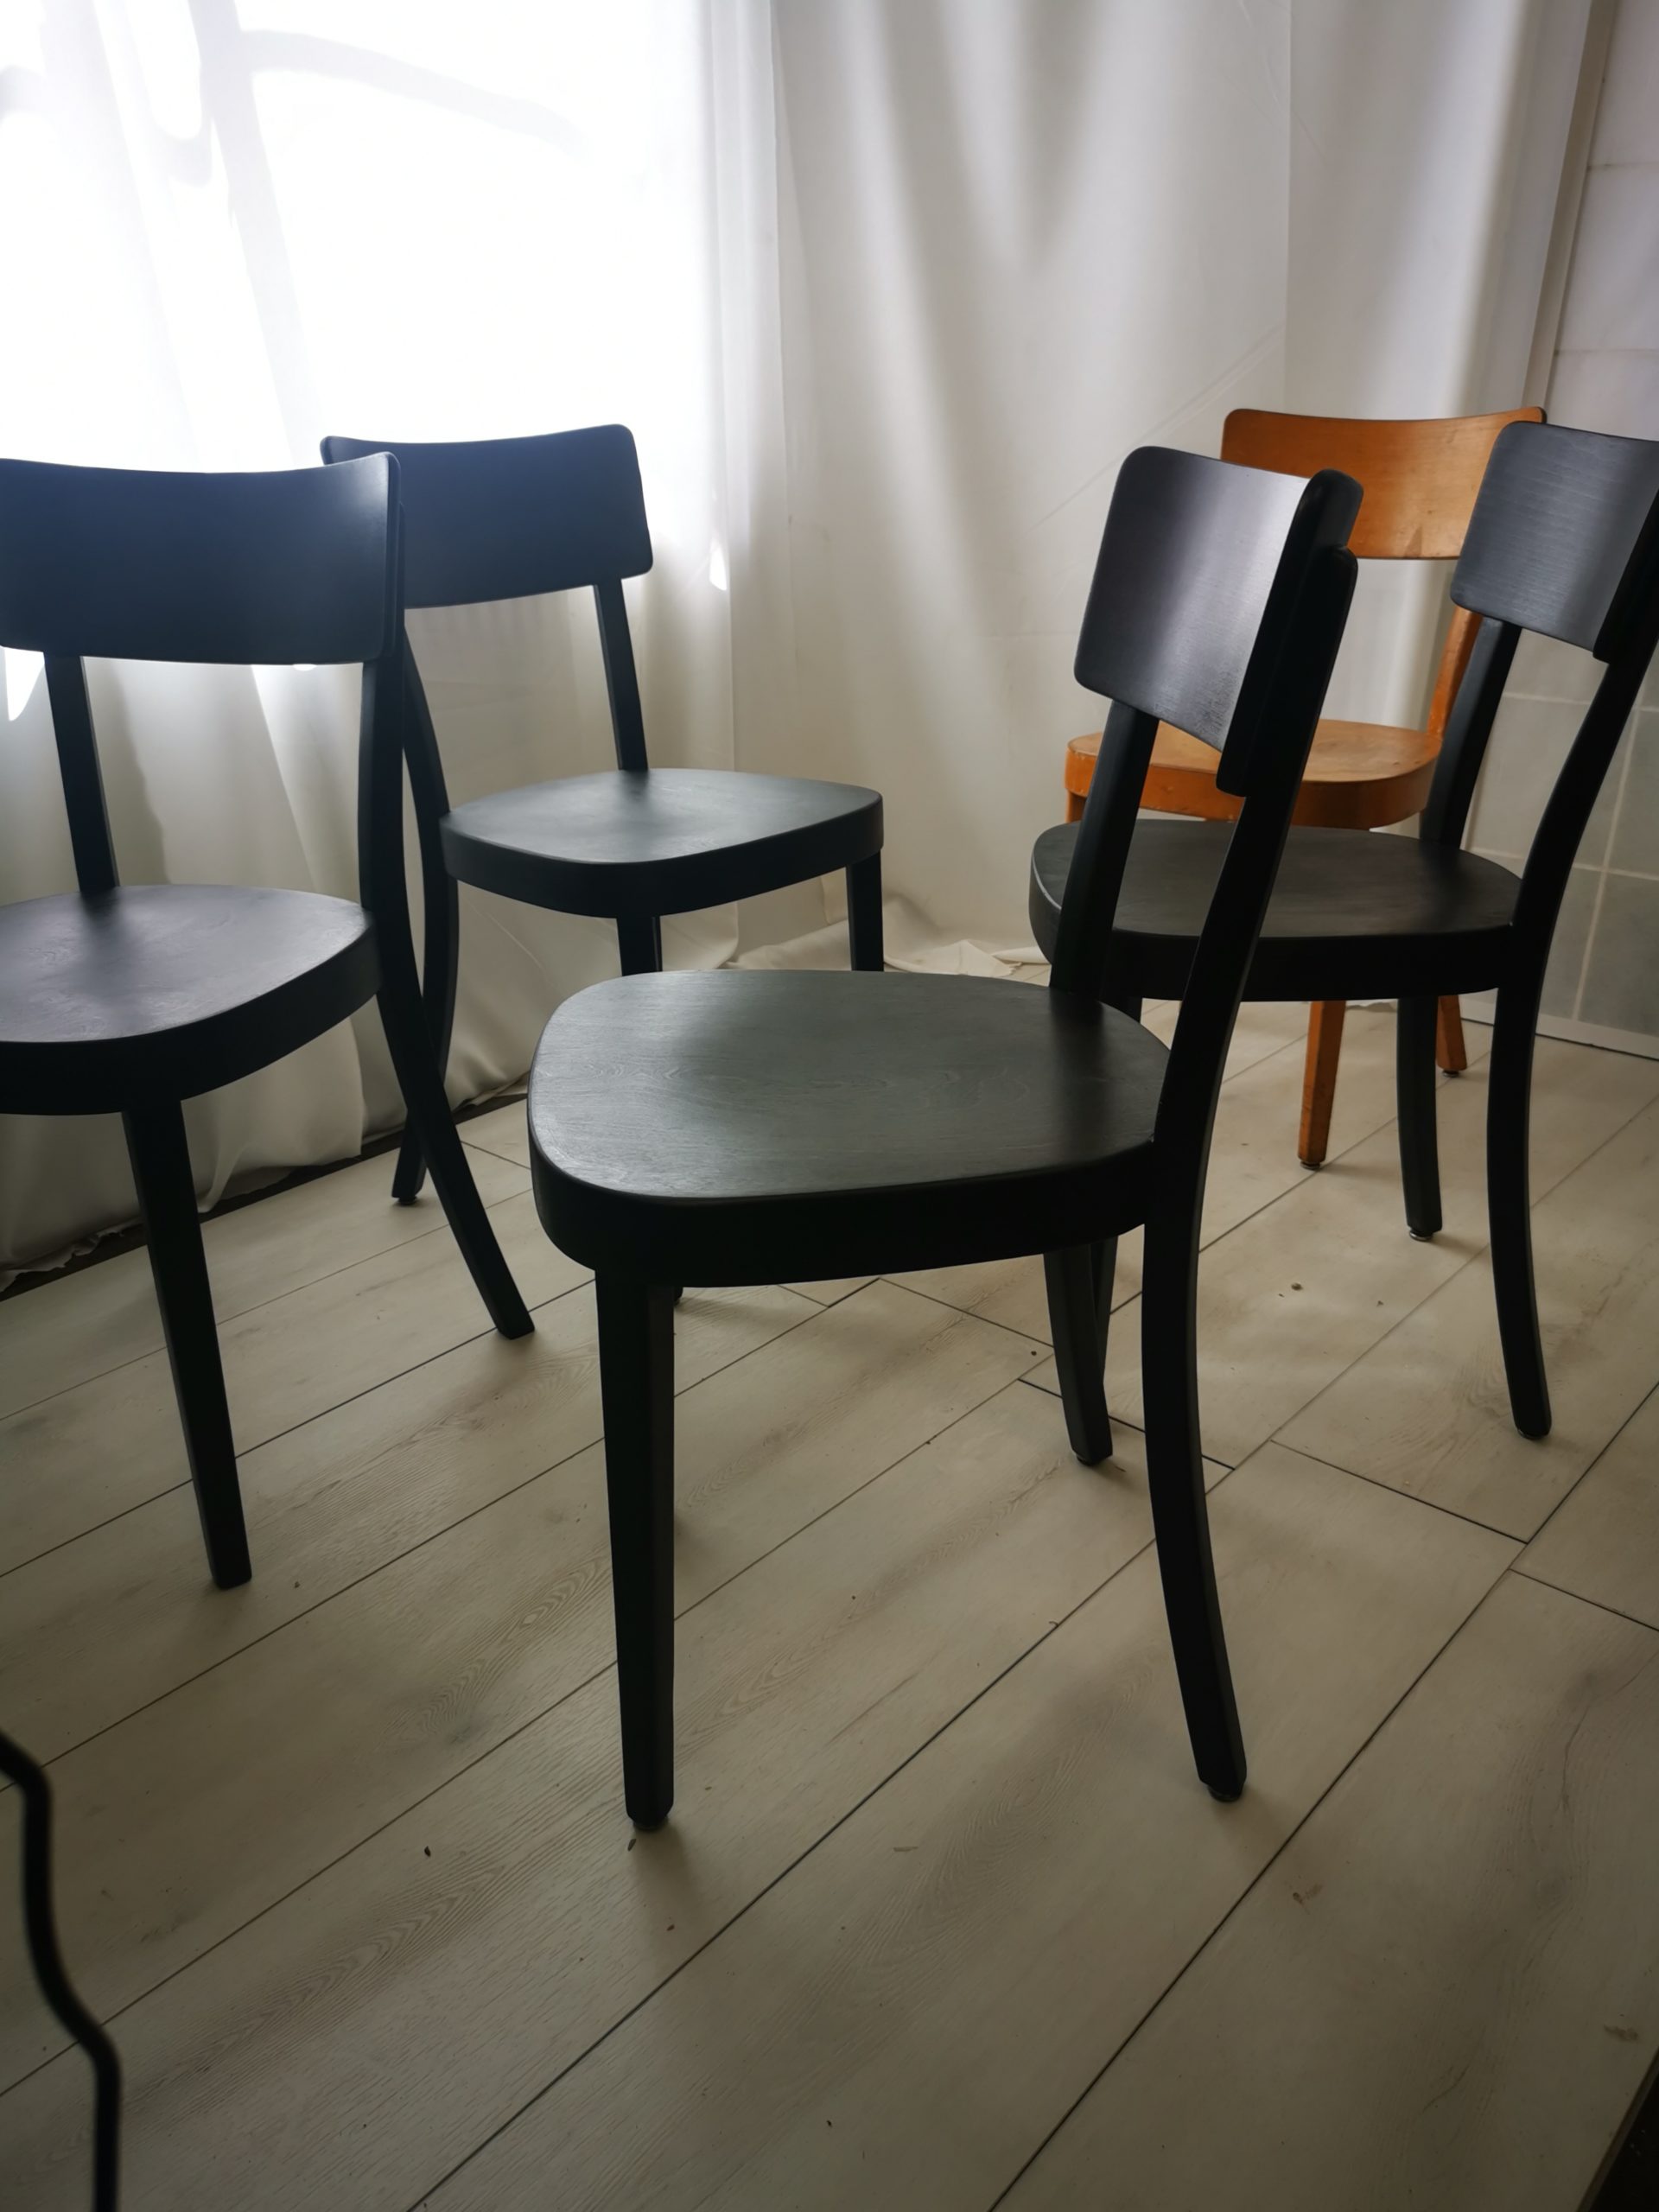 Horgen Glarus Classic Chairs - Image 1 | bevintage.ch